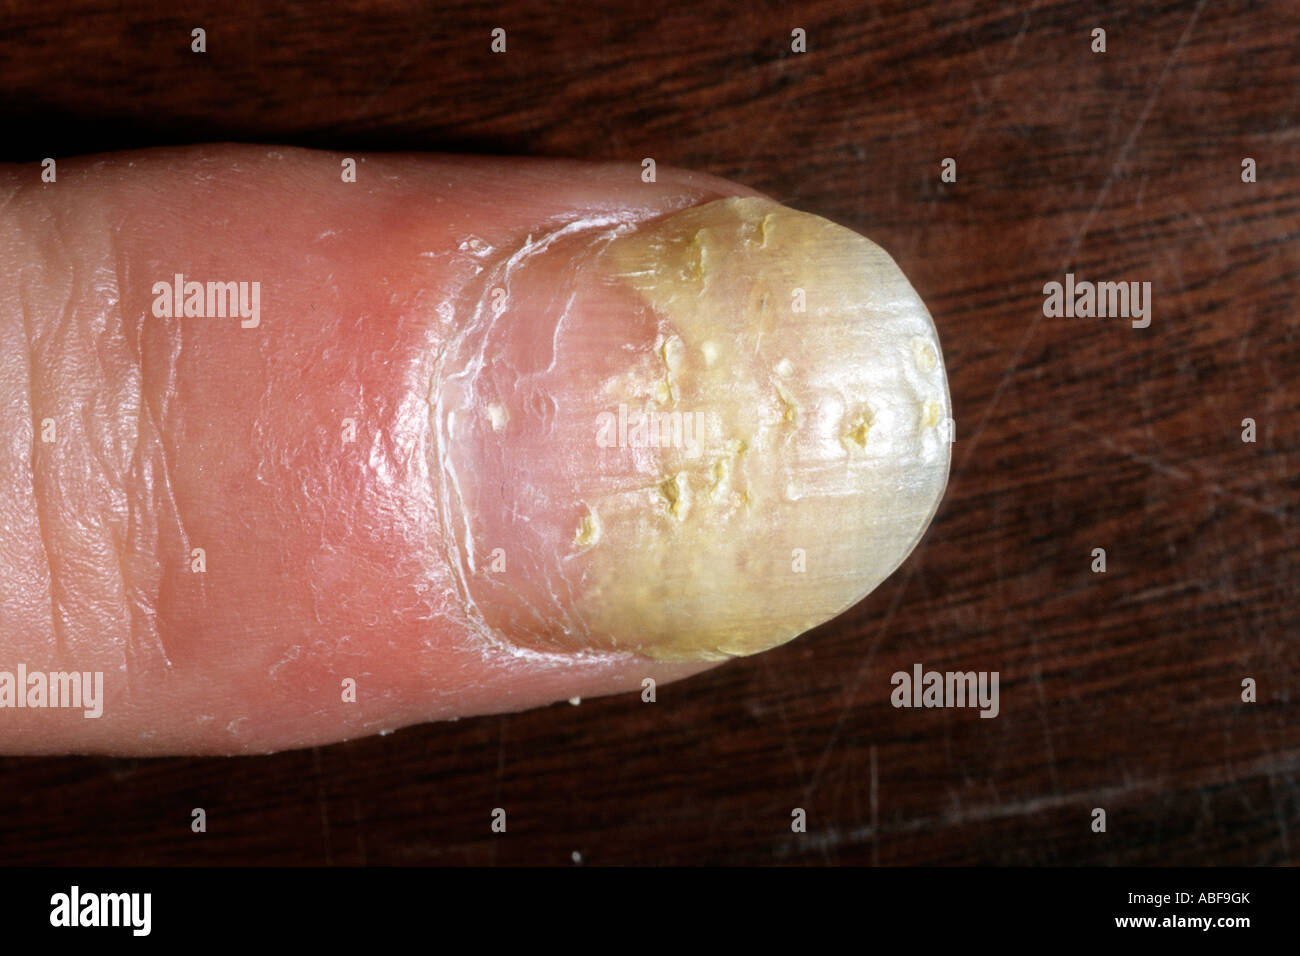 psoriasis affecting the nail showing pitting & onychlysis Stock Photo